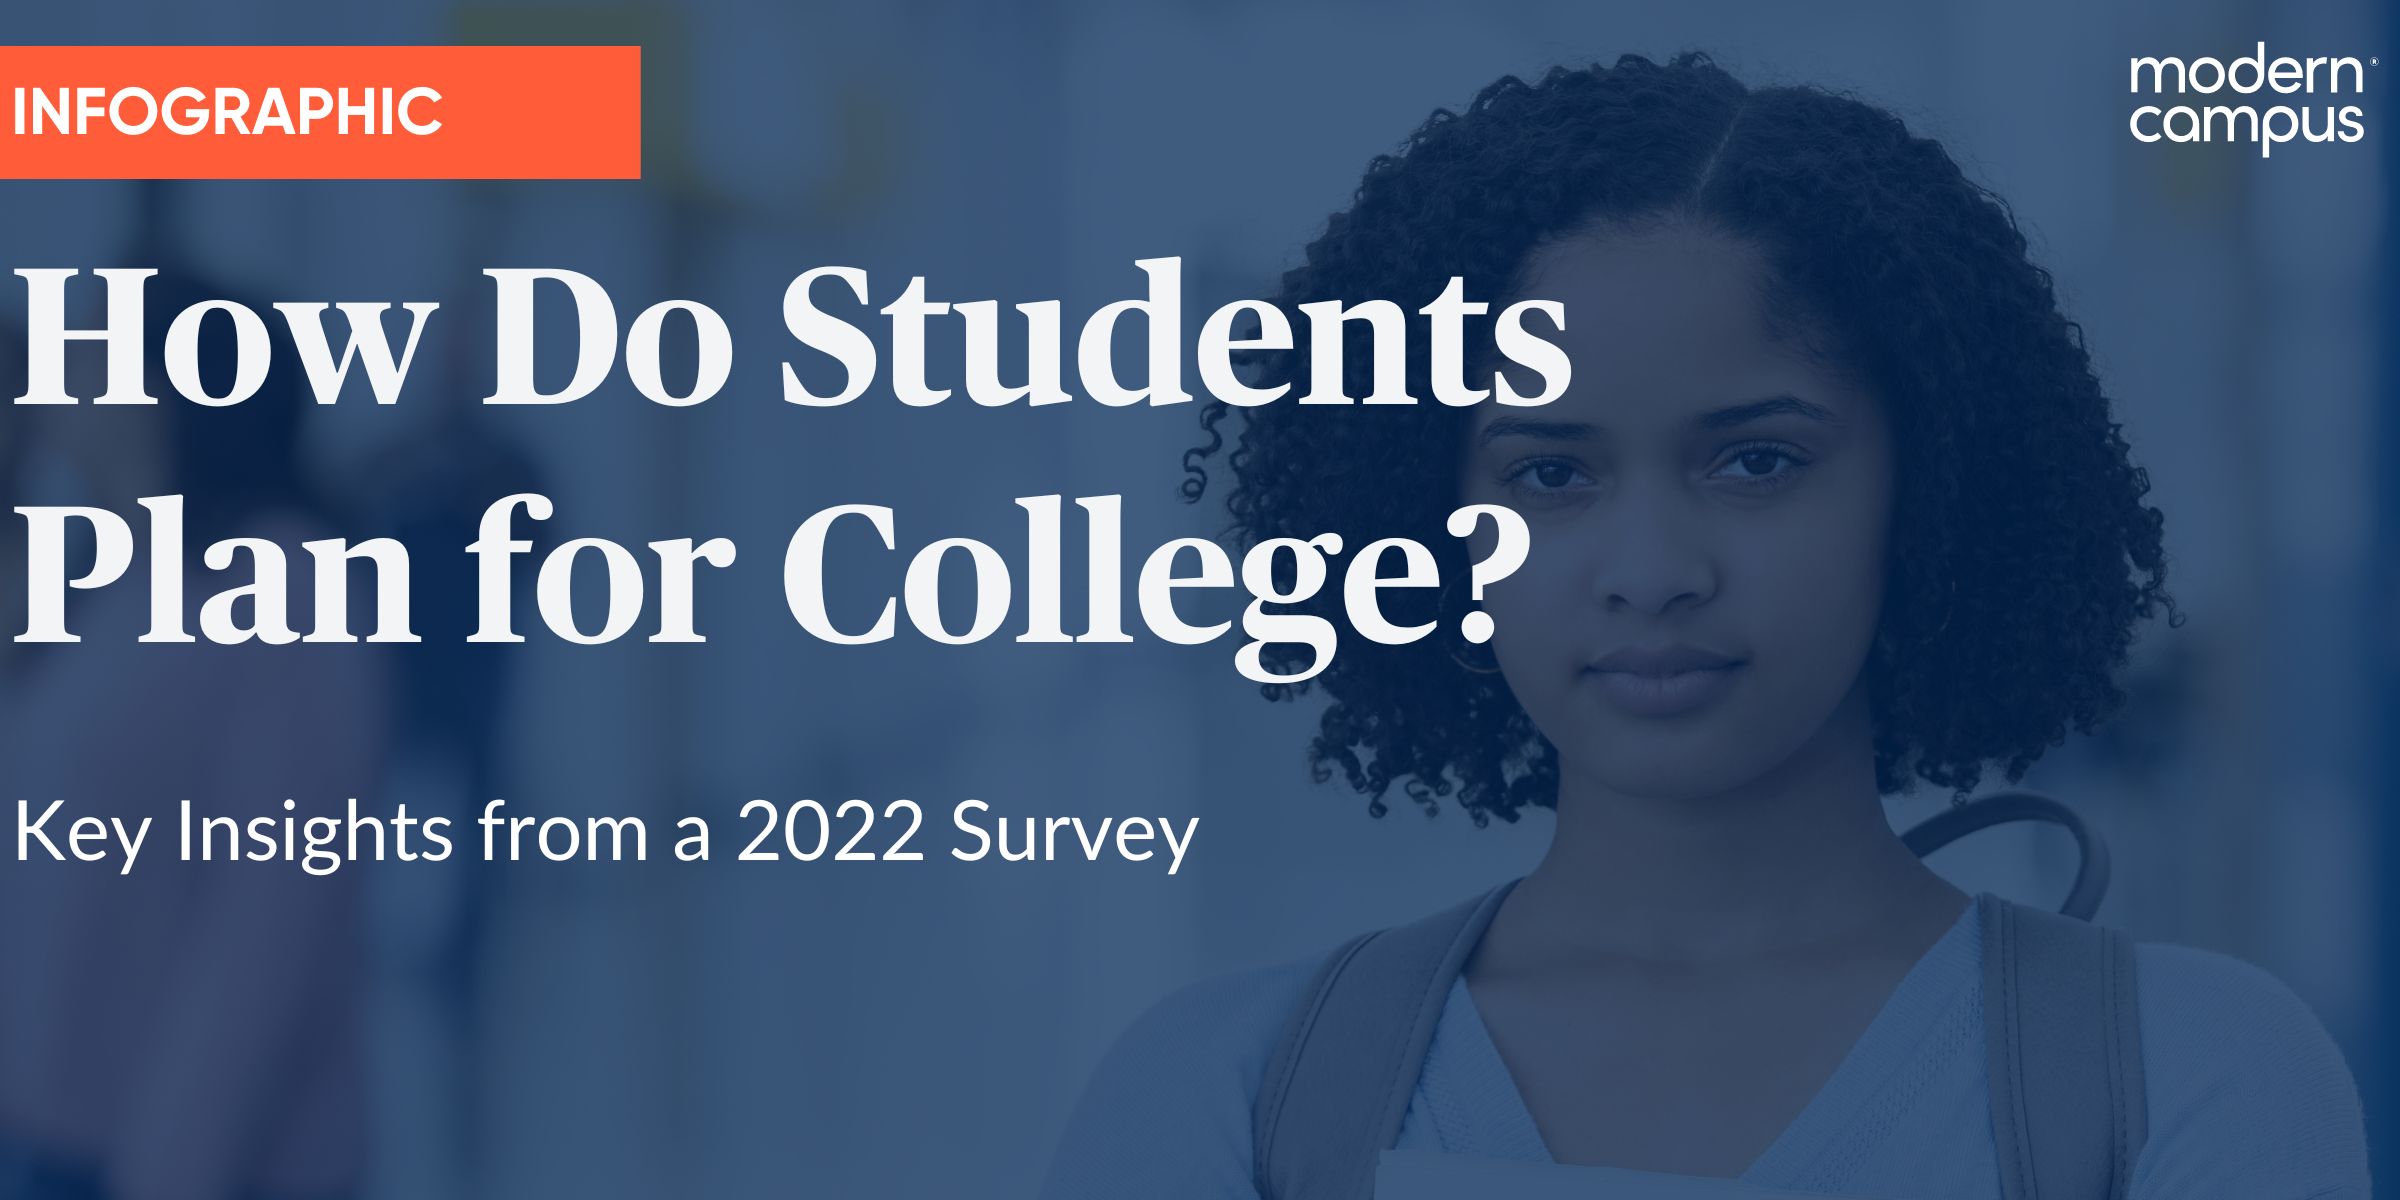 student's face with the infographic title 'how do students plan for college?'